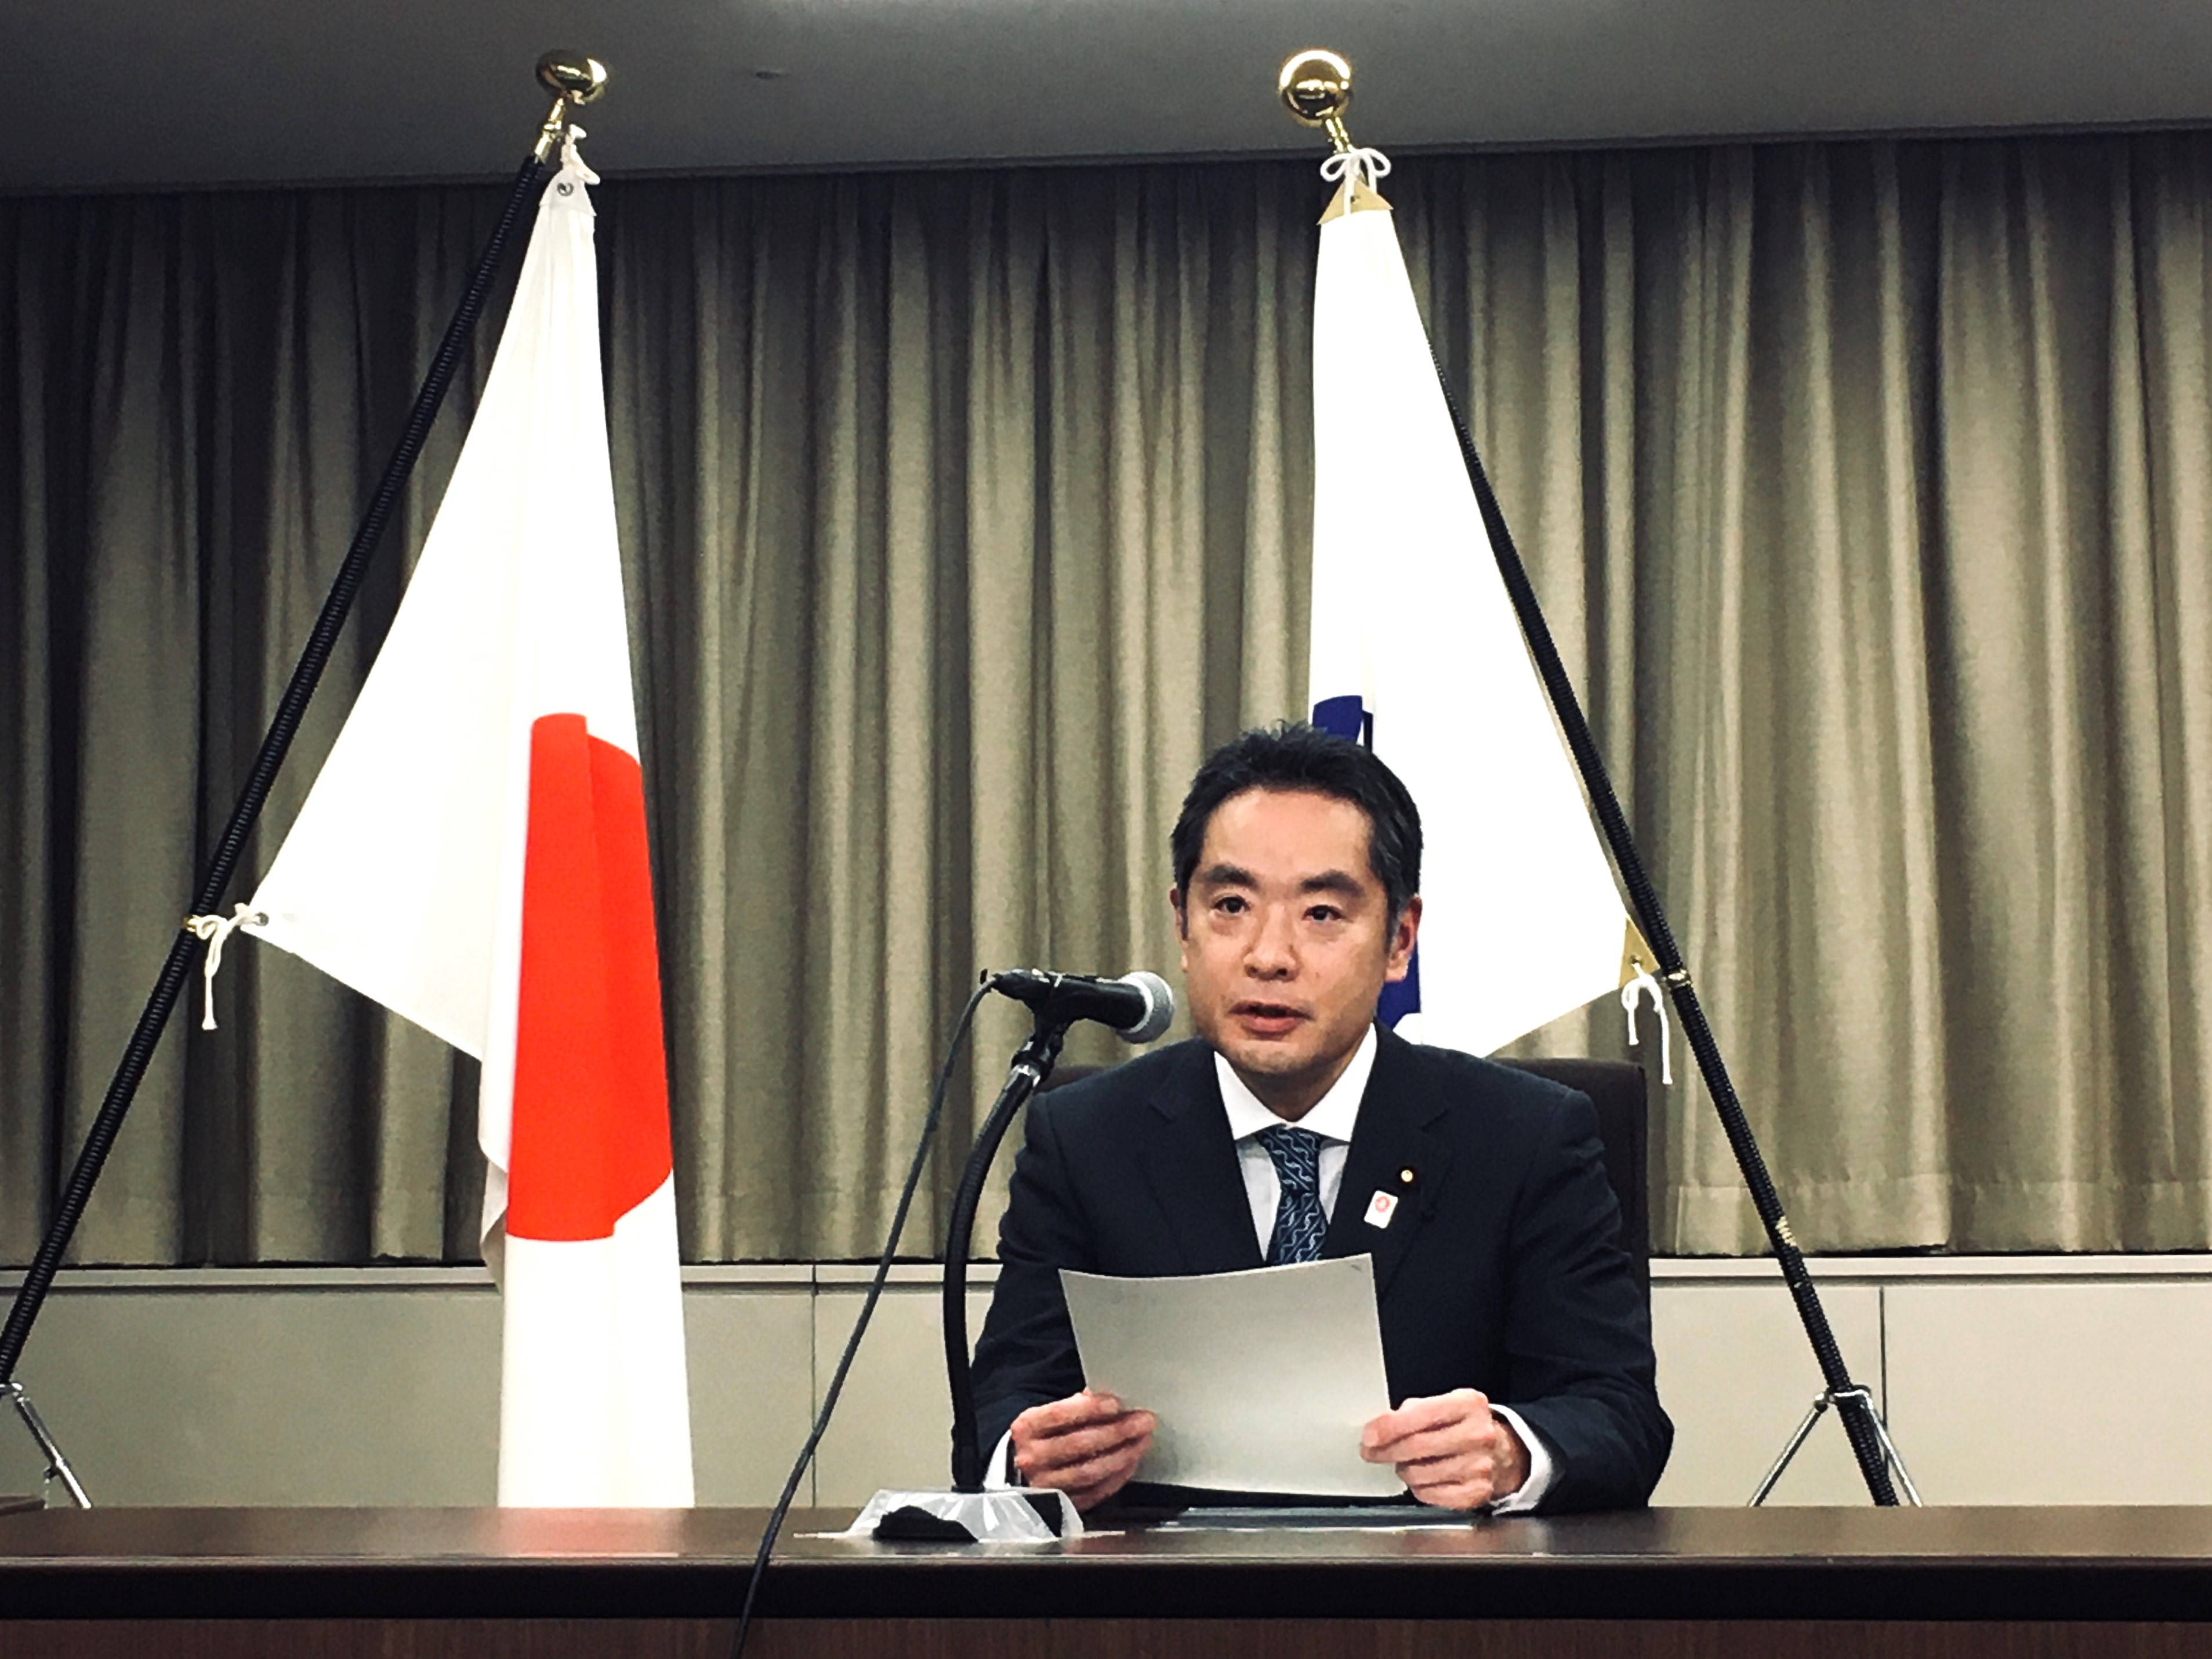 Minister Inoue made a statement.